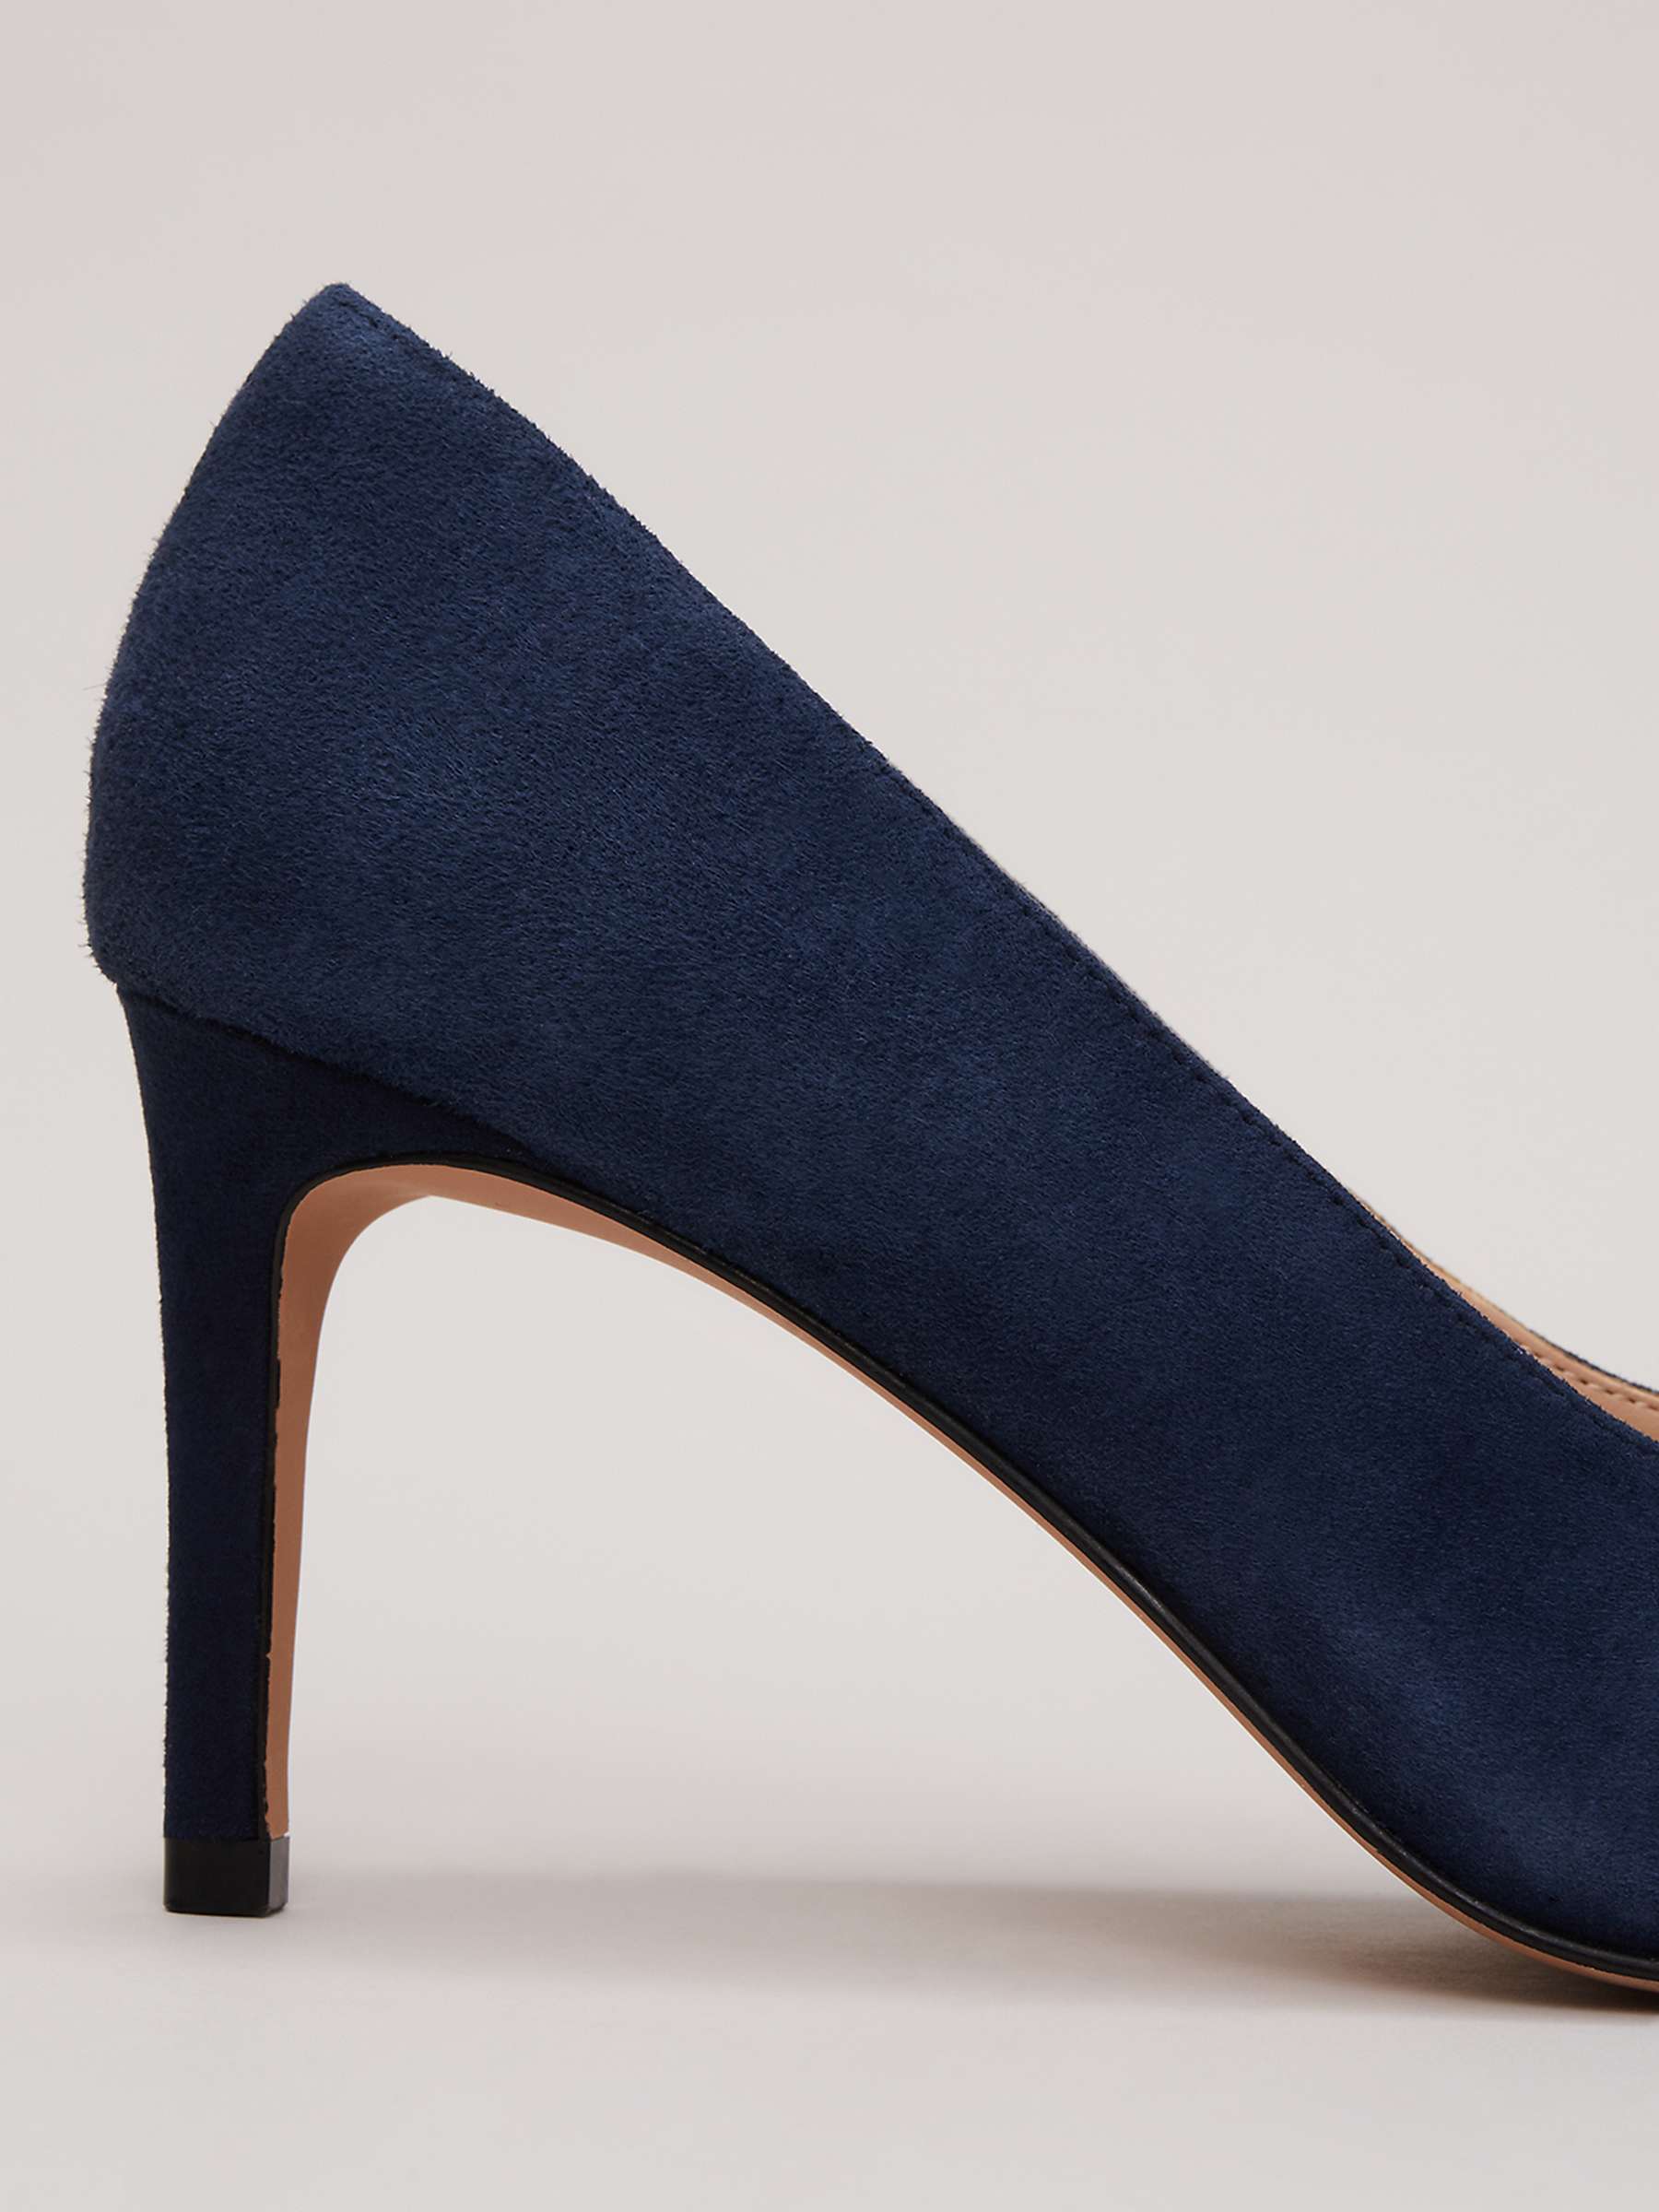 Buy Phase Eight Suede Court Shoes Online at johnlewis.com